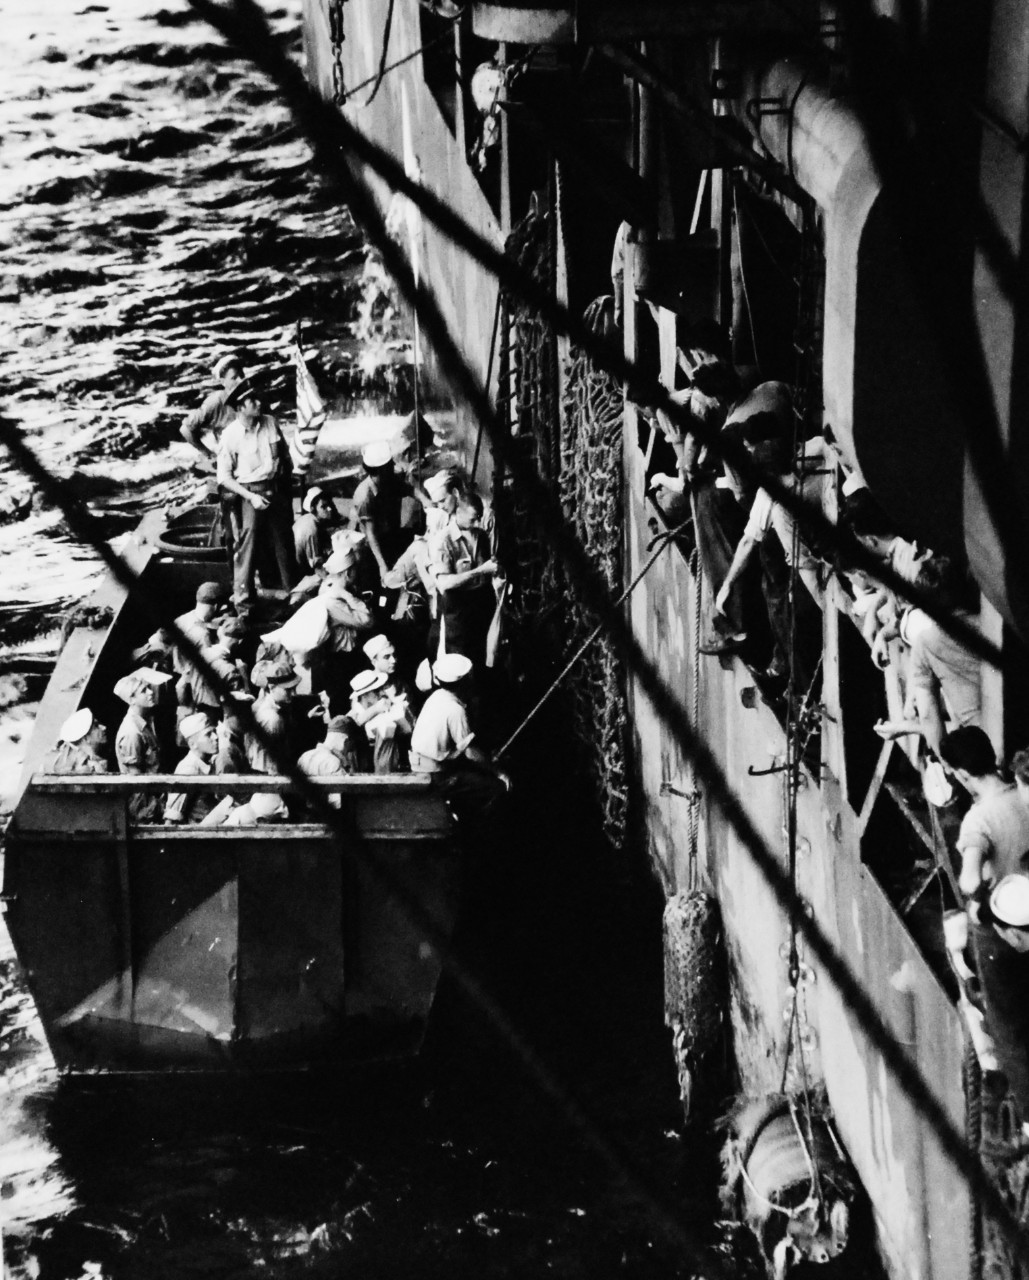 80-G-346551:  Allied Prisoners of War, 1945.    Liberated Prisoners of War camps going on board USS Chenango (CVE-28) at Nagasaki, Japan.  These men await to scramble up the landing nets. Photographed by crew of USS Chenango (CVE-28), September 13, 1945.  Official U.S. Navy photograph, now in the collections of the National Archives.   (2014/11/5).